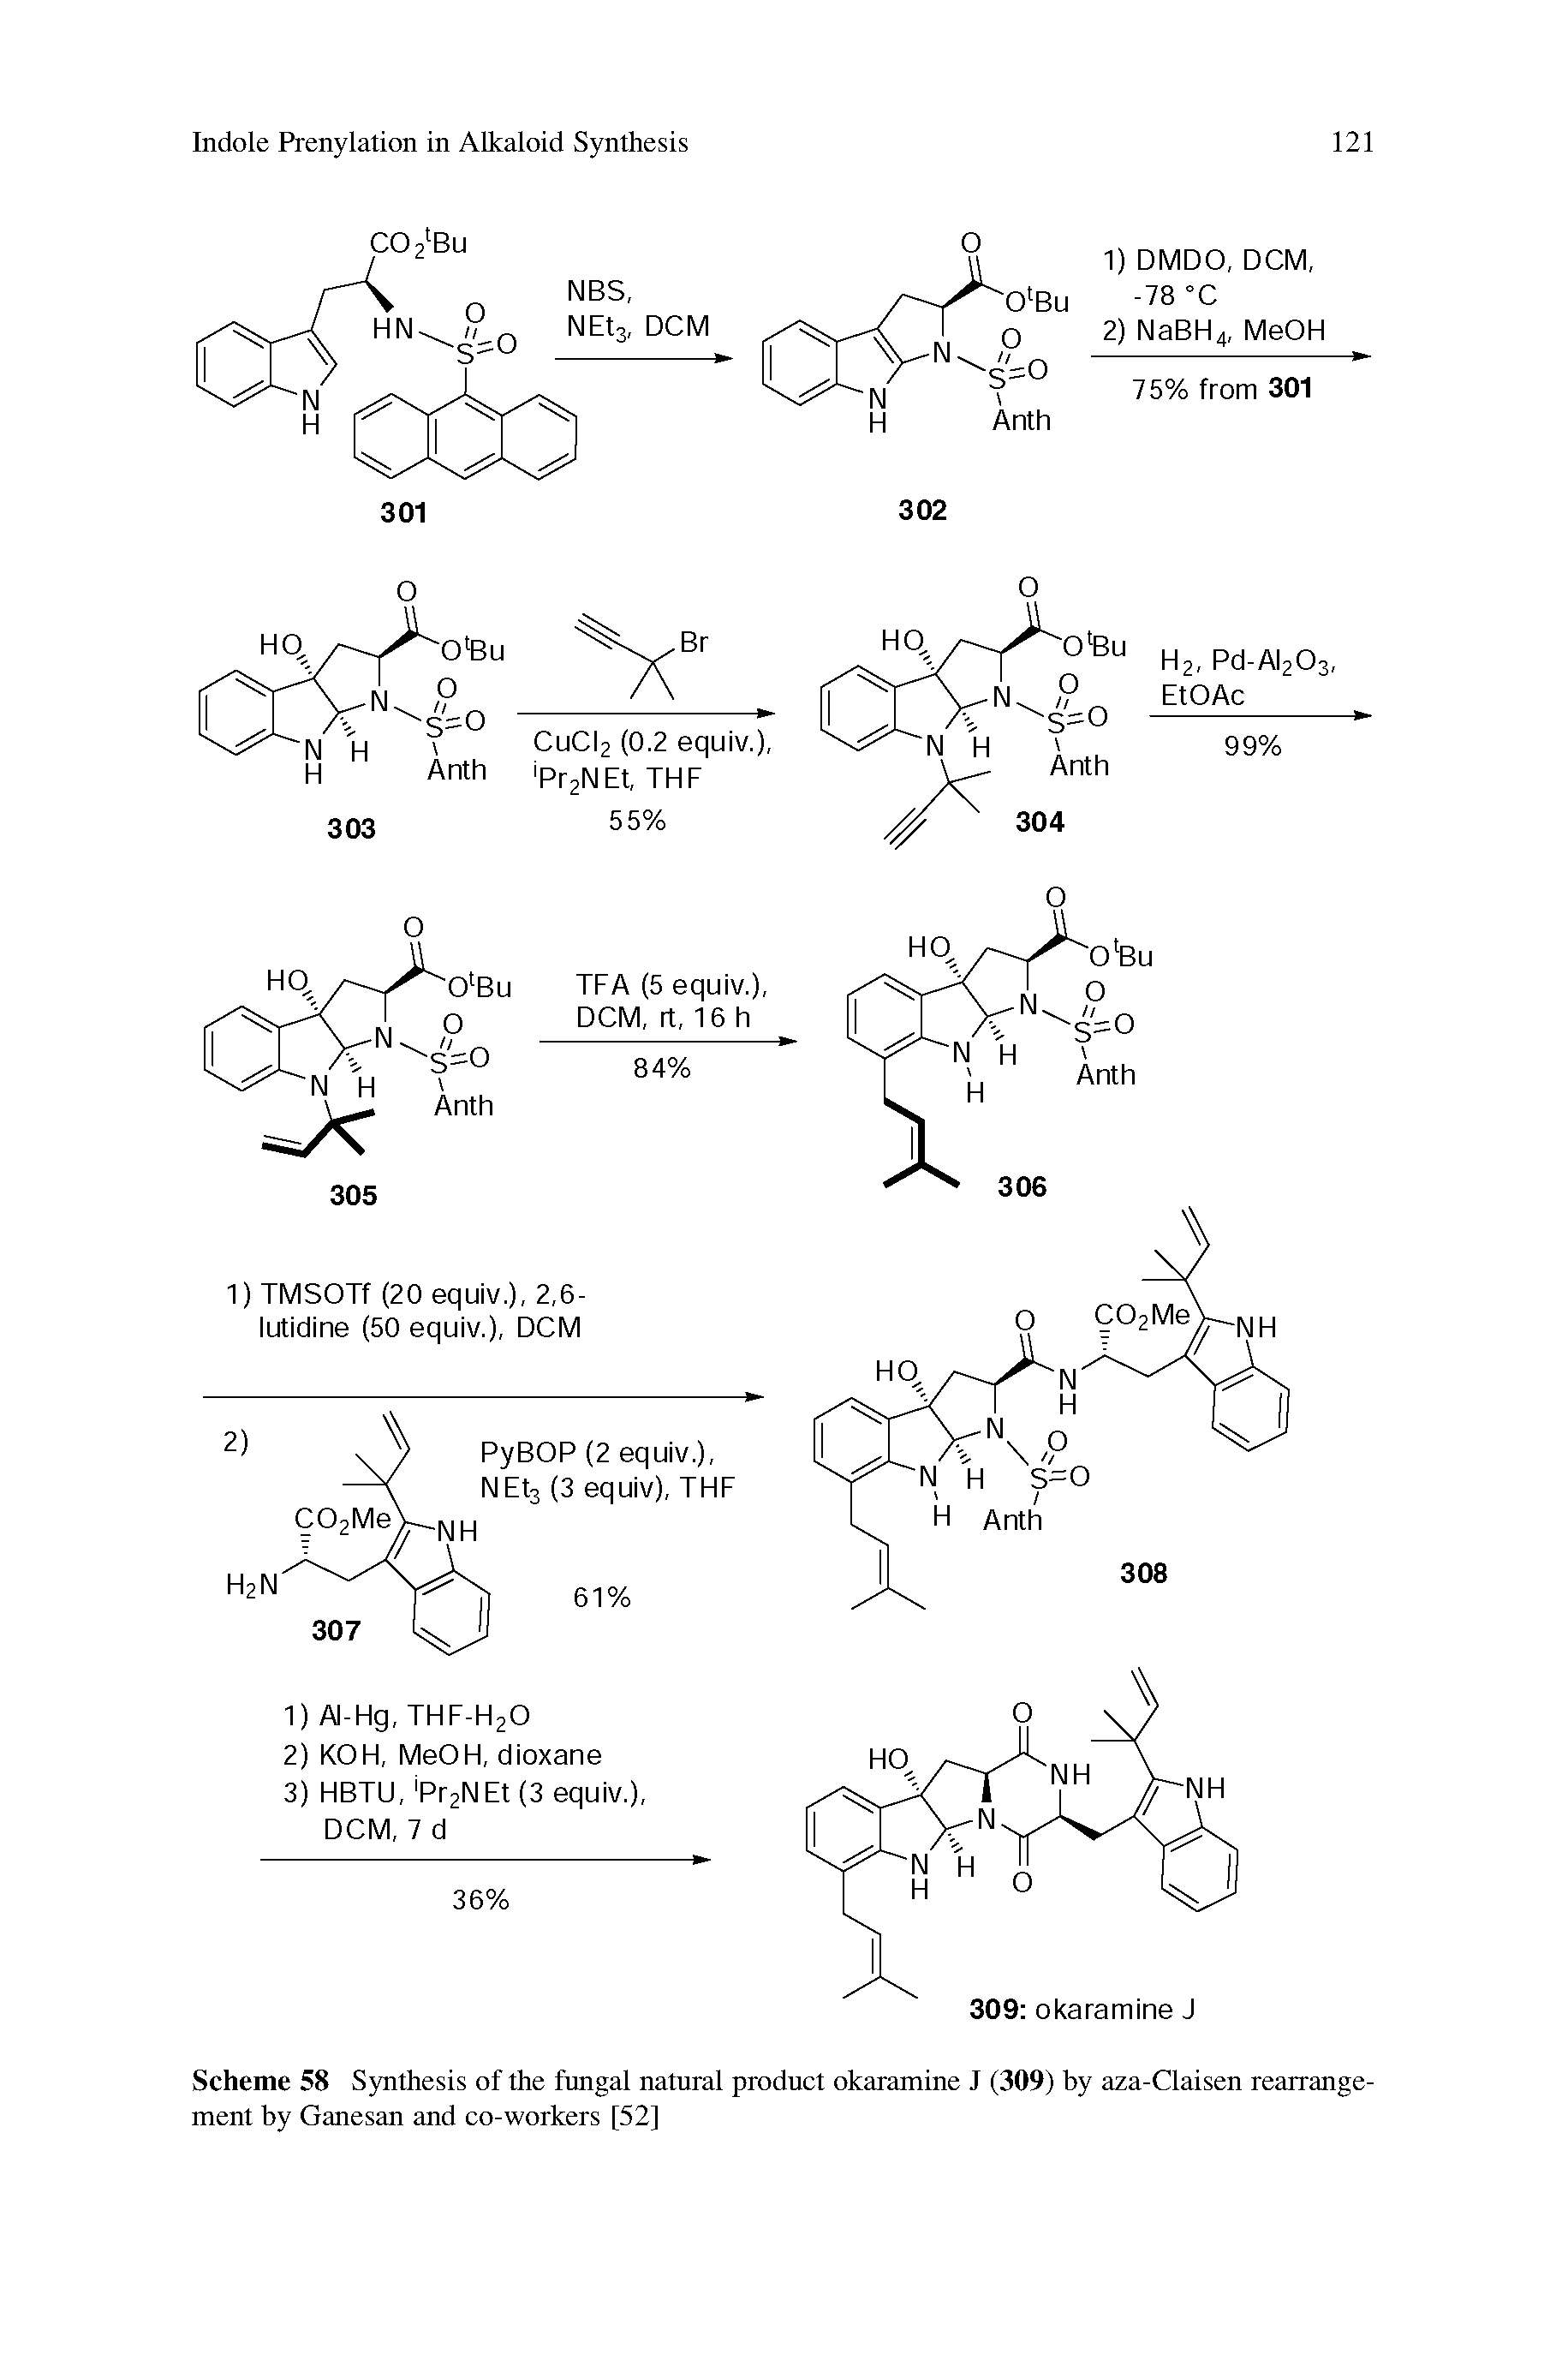 Scheme 58 Synthesis of the fungal natural product okaramine J (309) by aza-Claisen rearrangement by Ganesan and co-workers [52]...